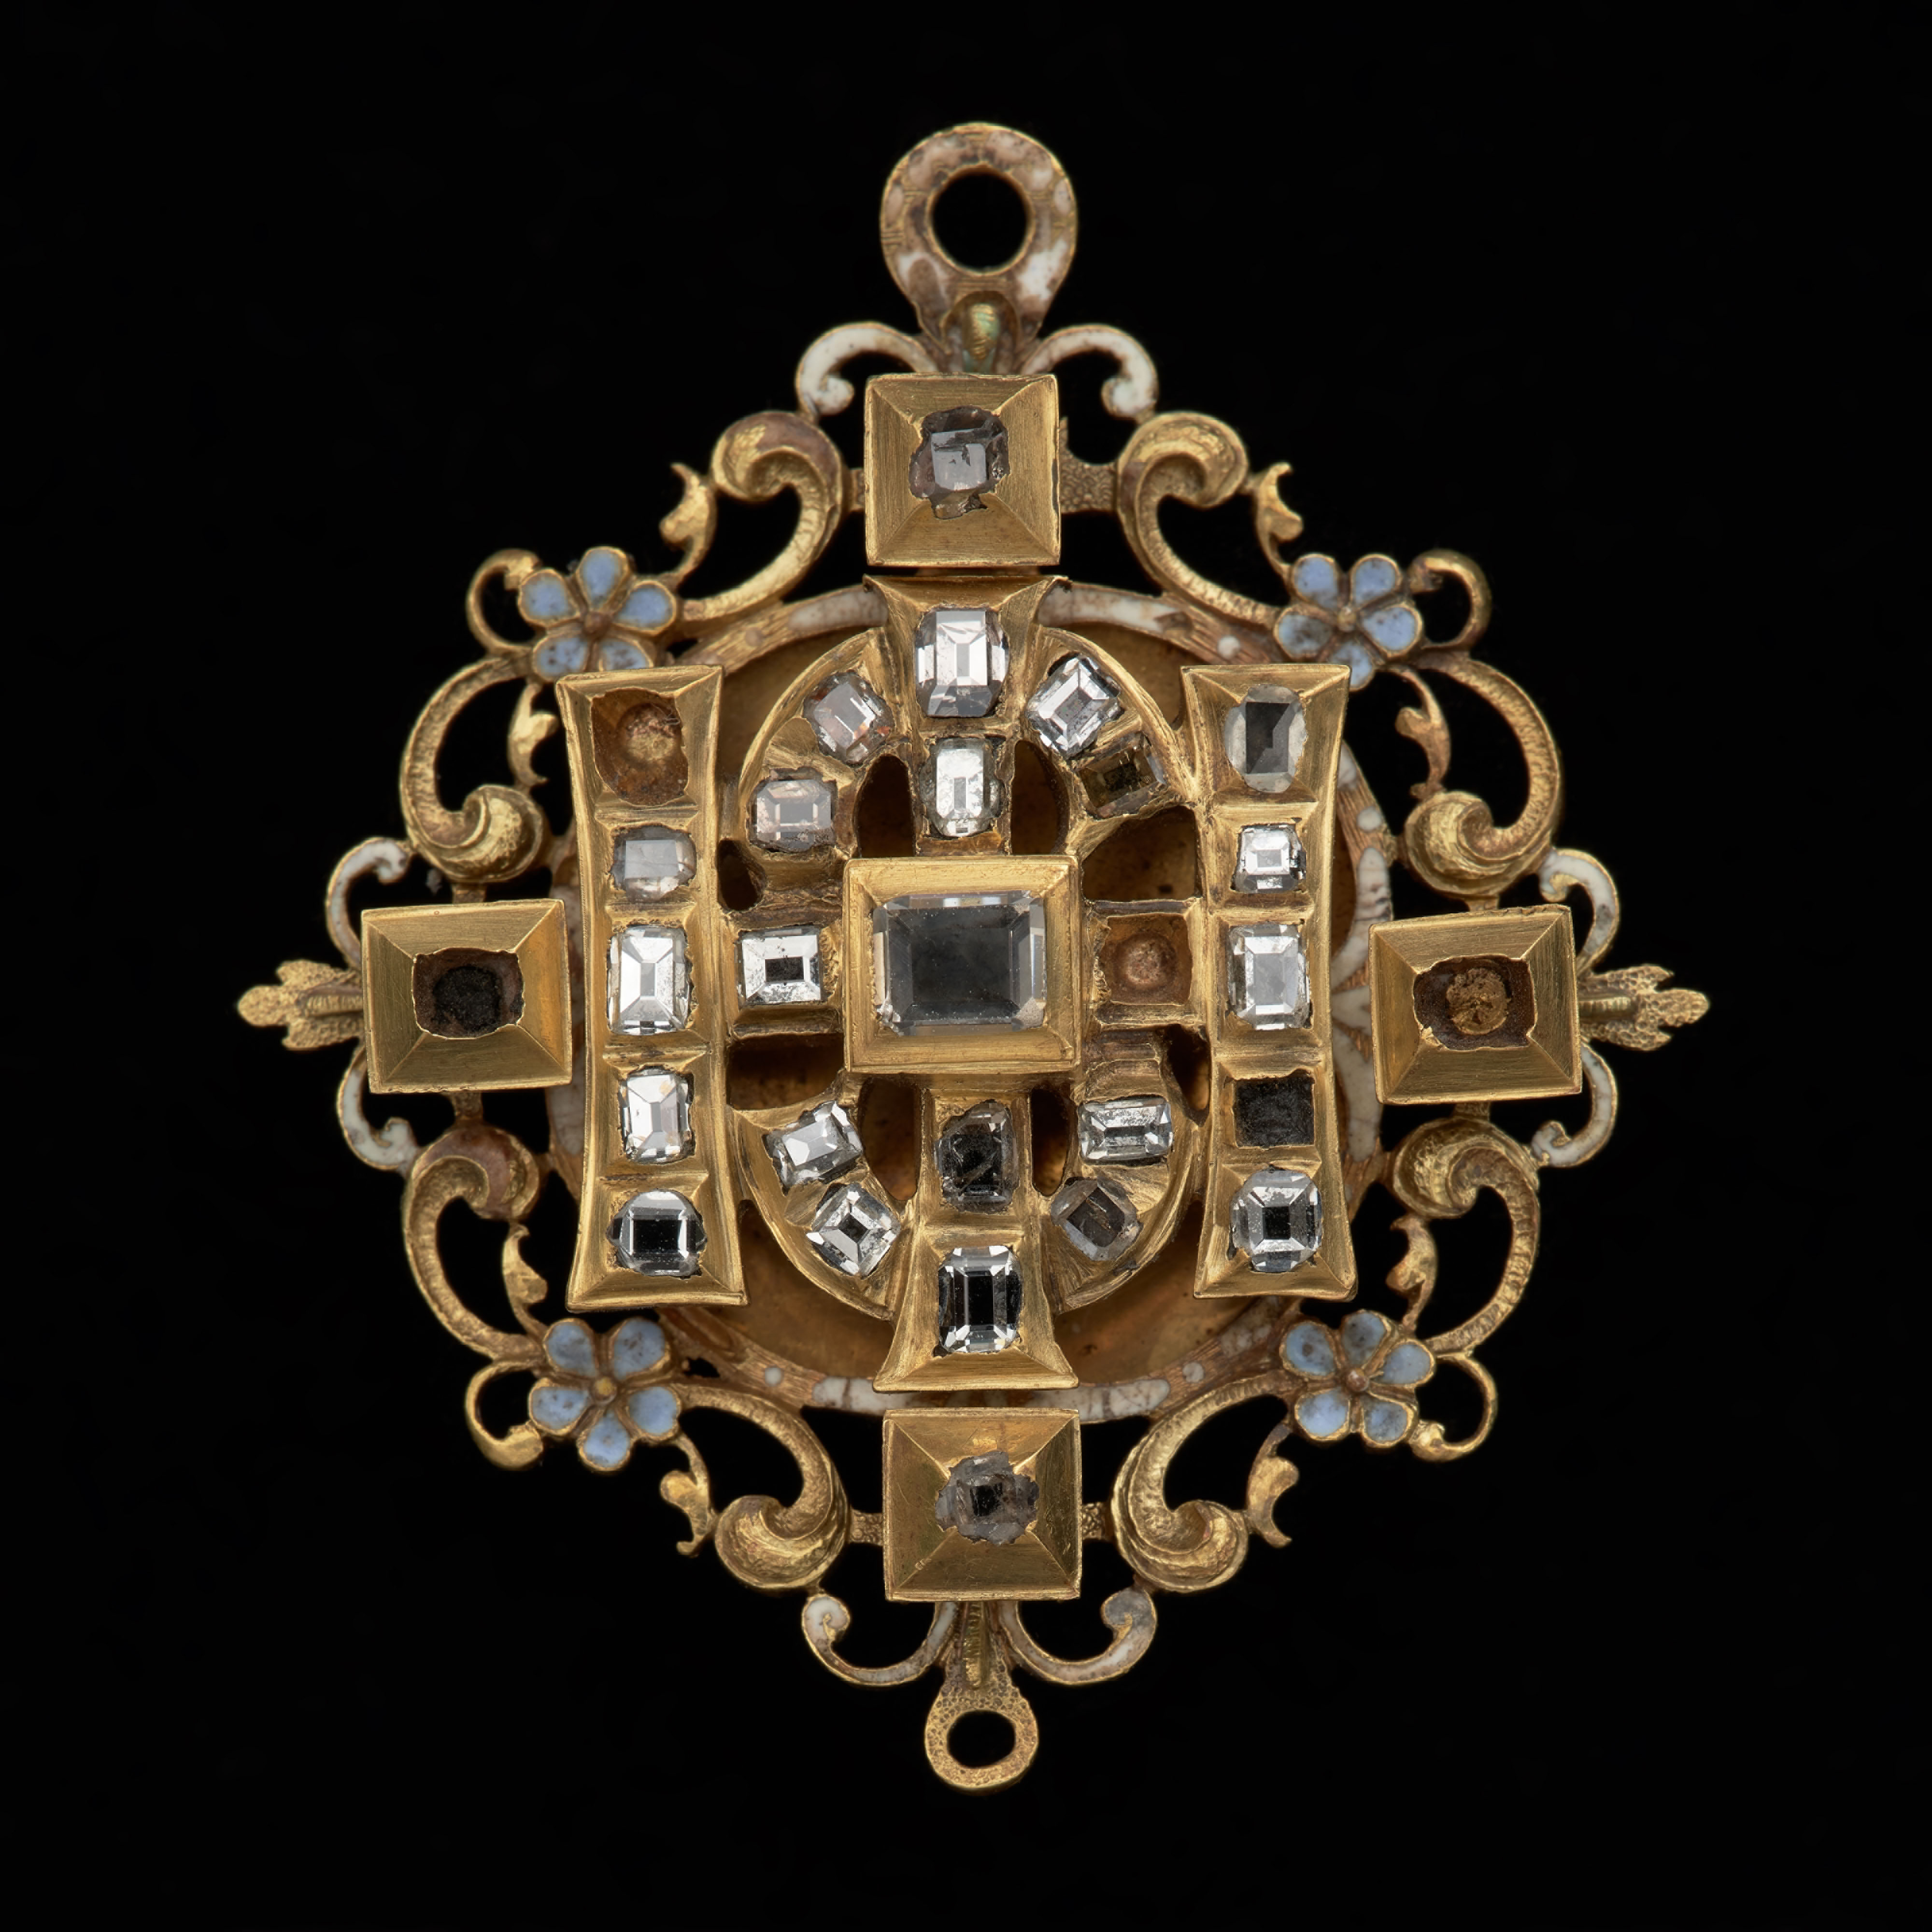 IHS pendant of Prince Francis I (1577-1620) MNS/Rz/2562 – In museums